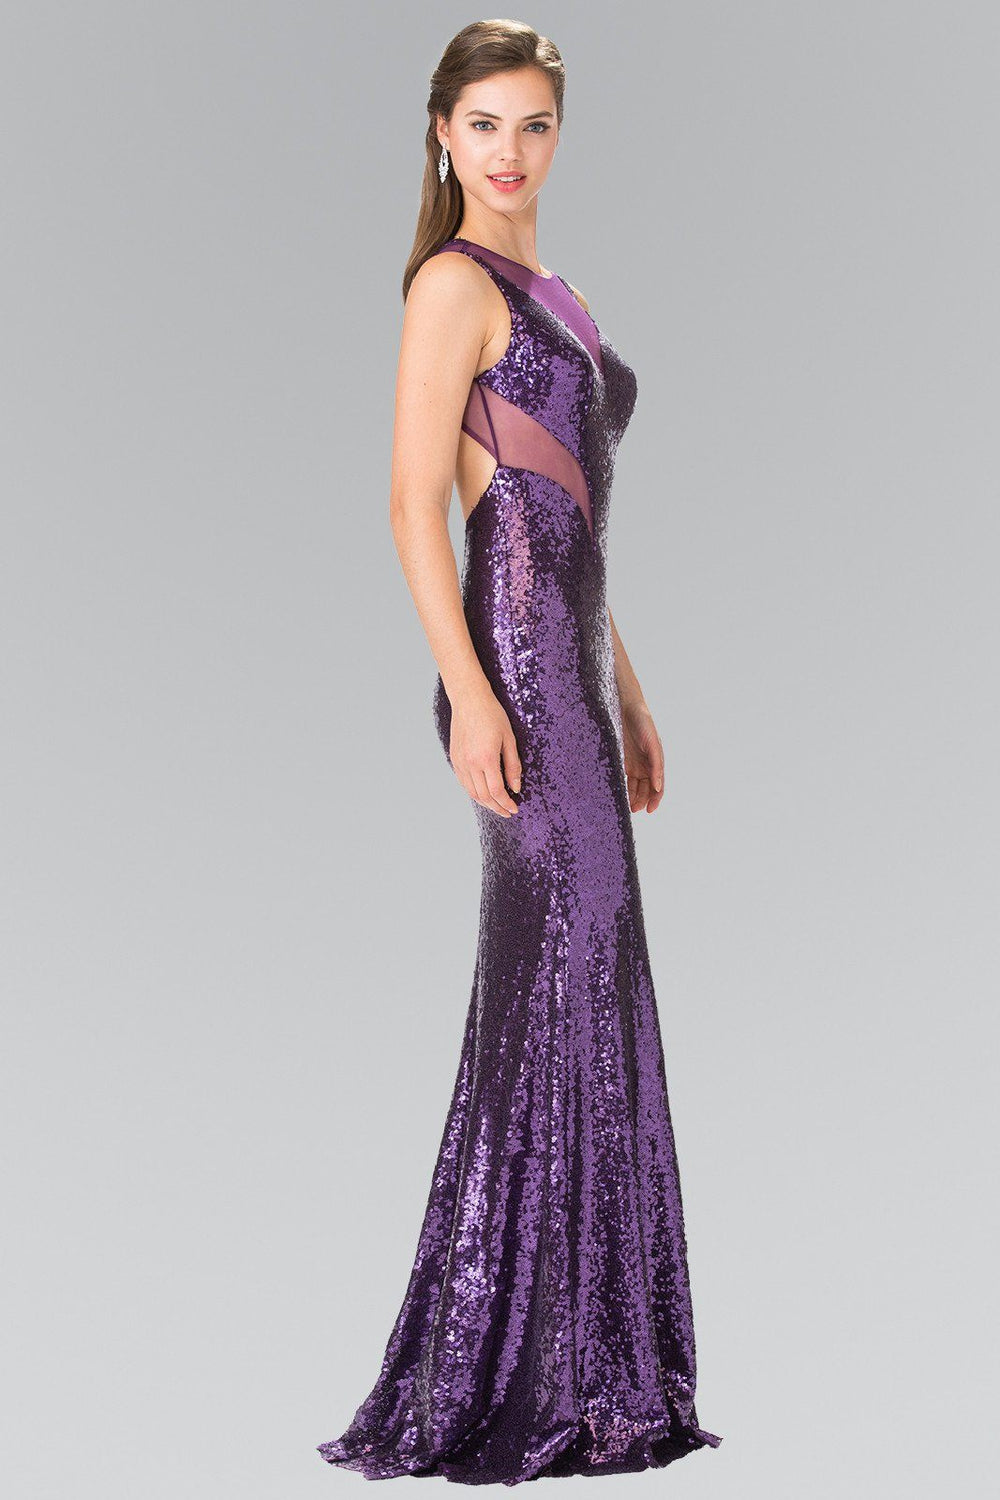 Sleeveless Sequined Dress with Sheer Cutouts by Elizabeth K GL2292-Long Formal Dresses-ABC Fashion